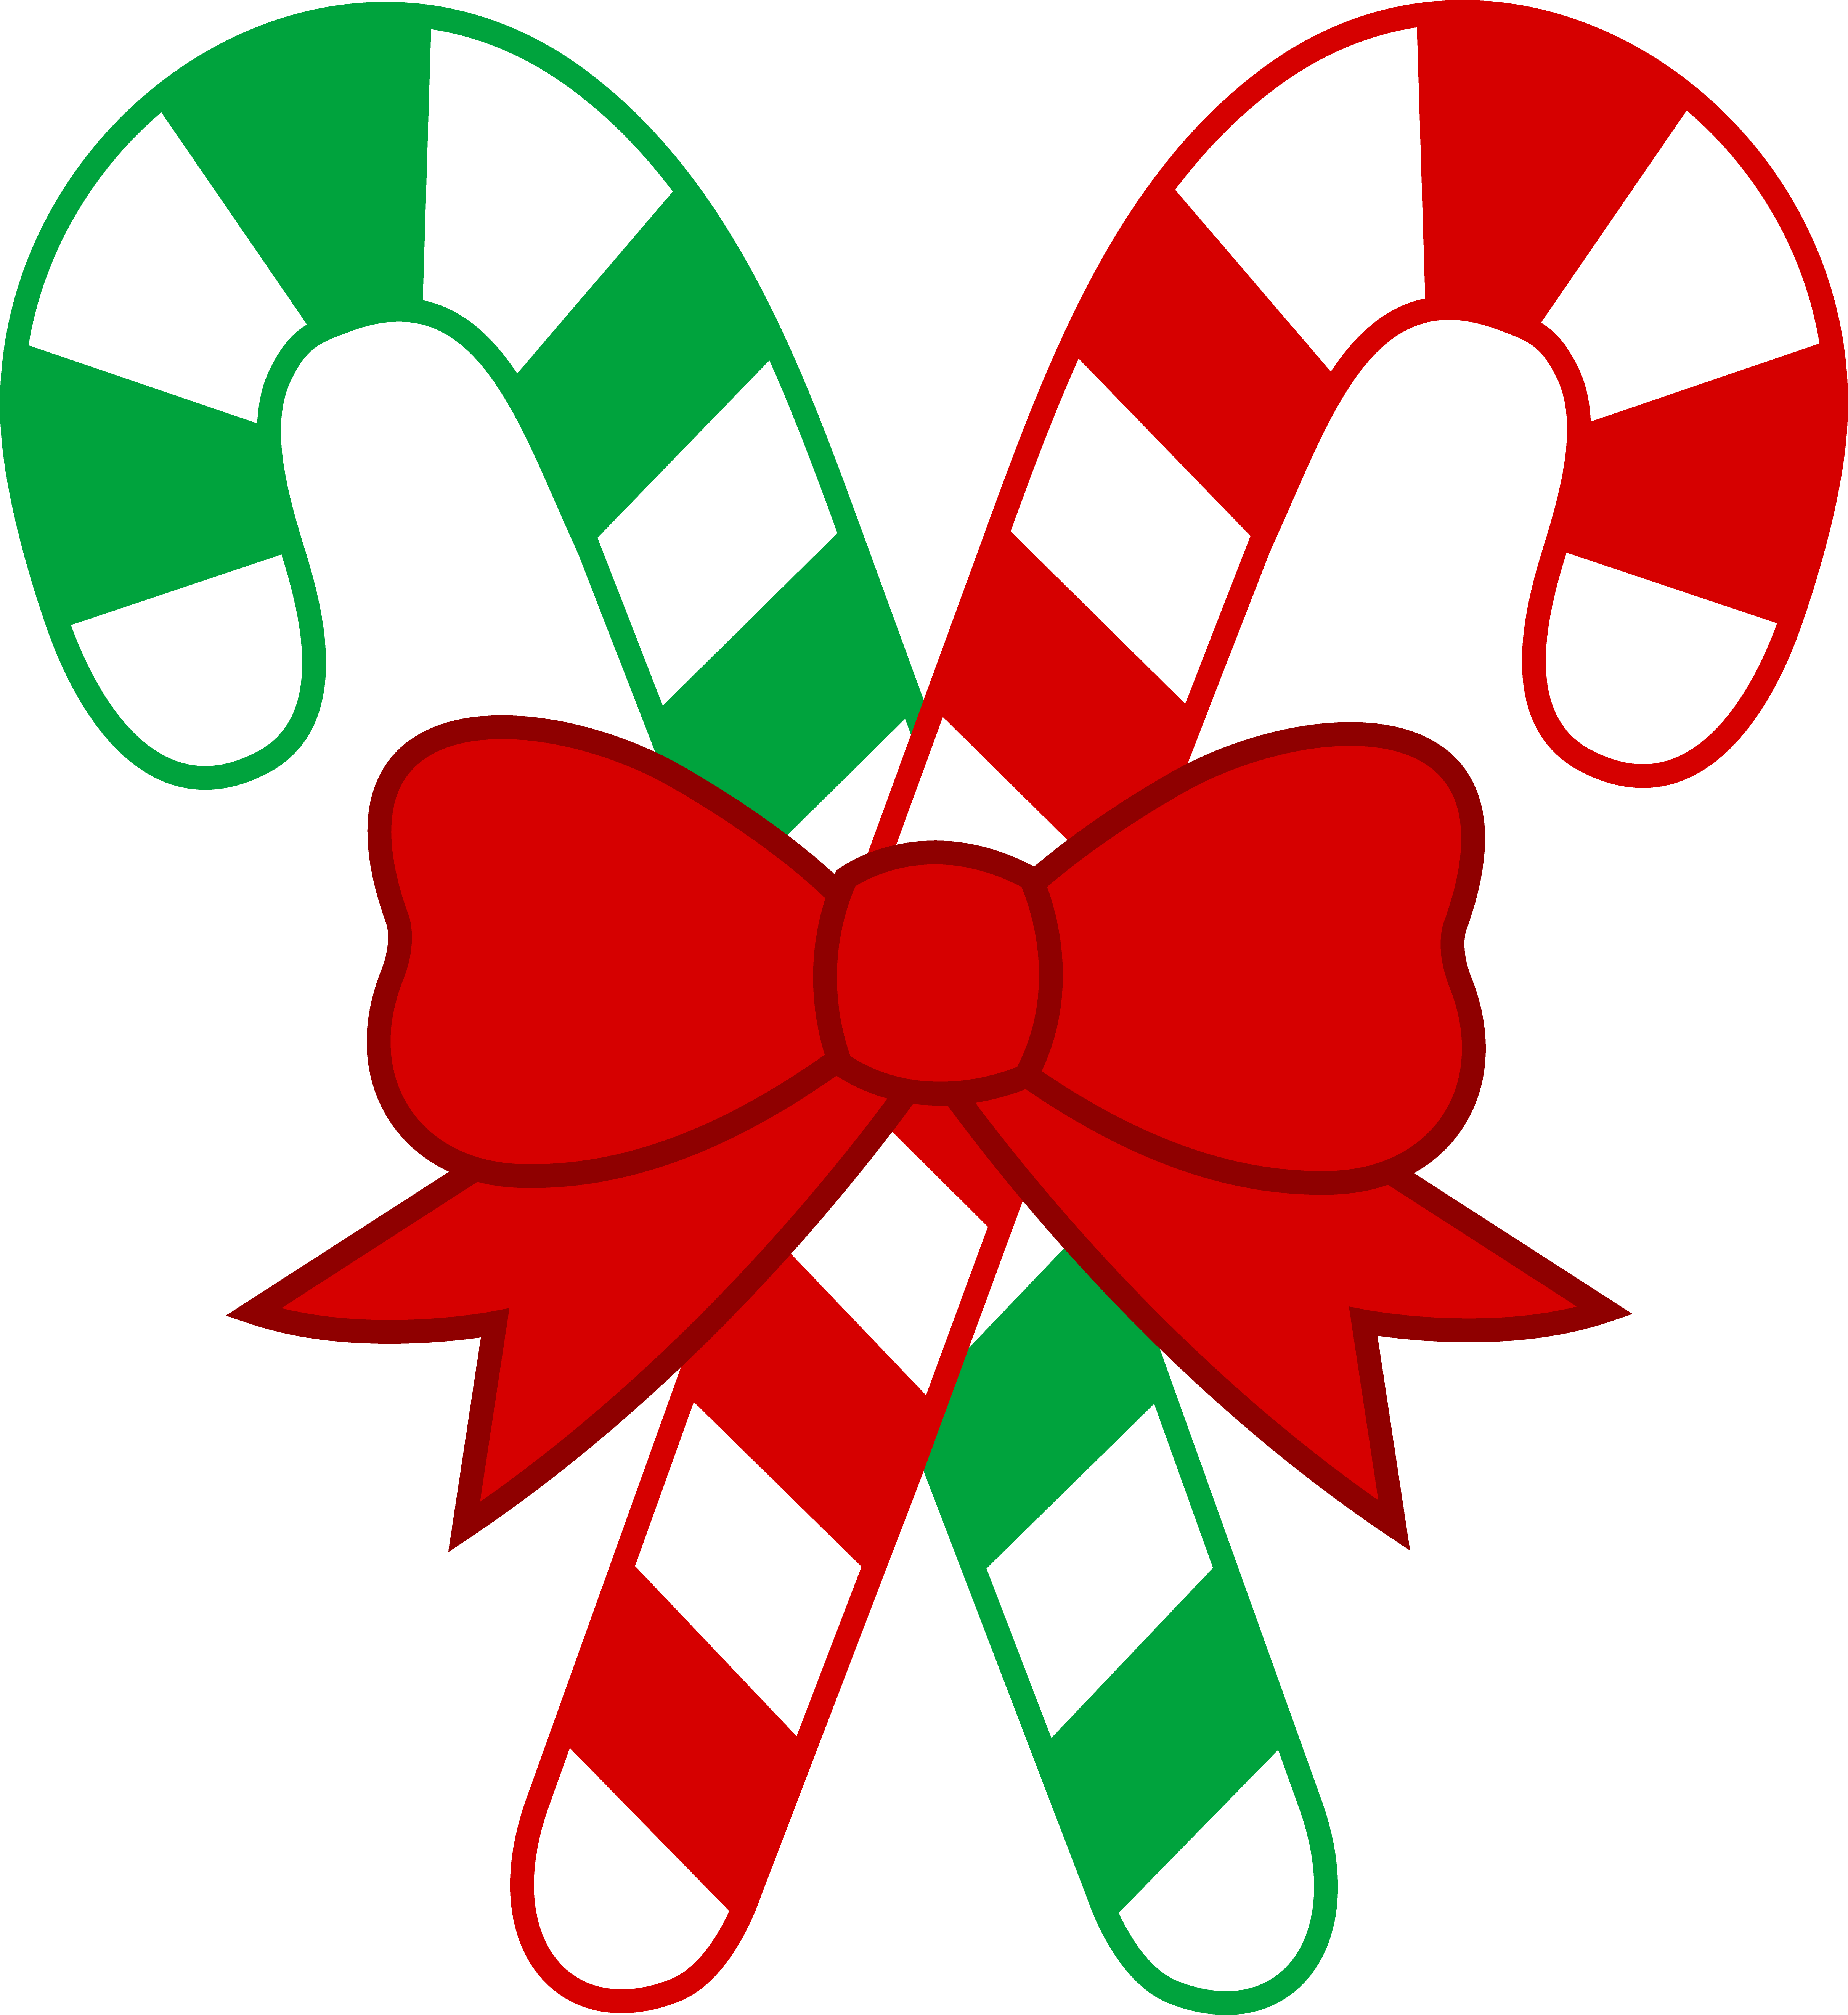 Peppermint Candy Image 